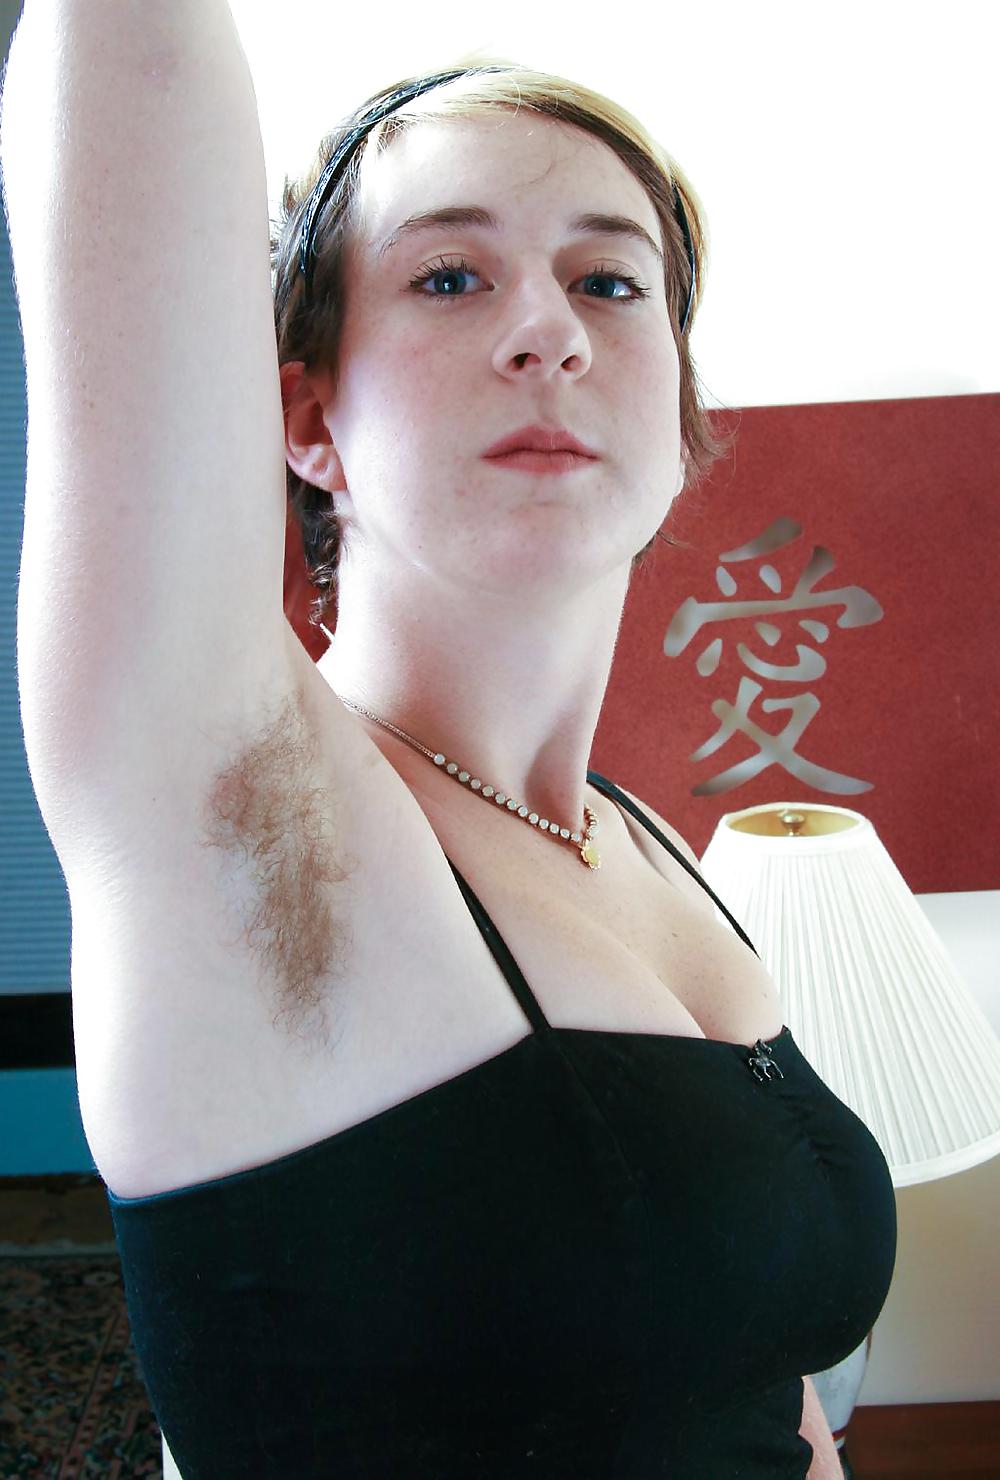 Miscellaneous girls showing hairy, unshaven armpits 1 #36224895